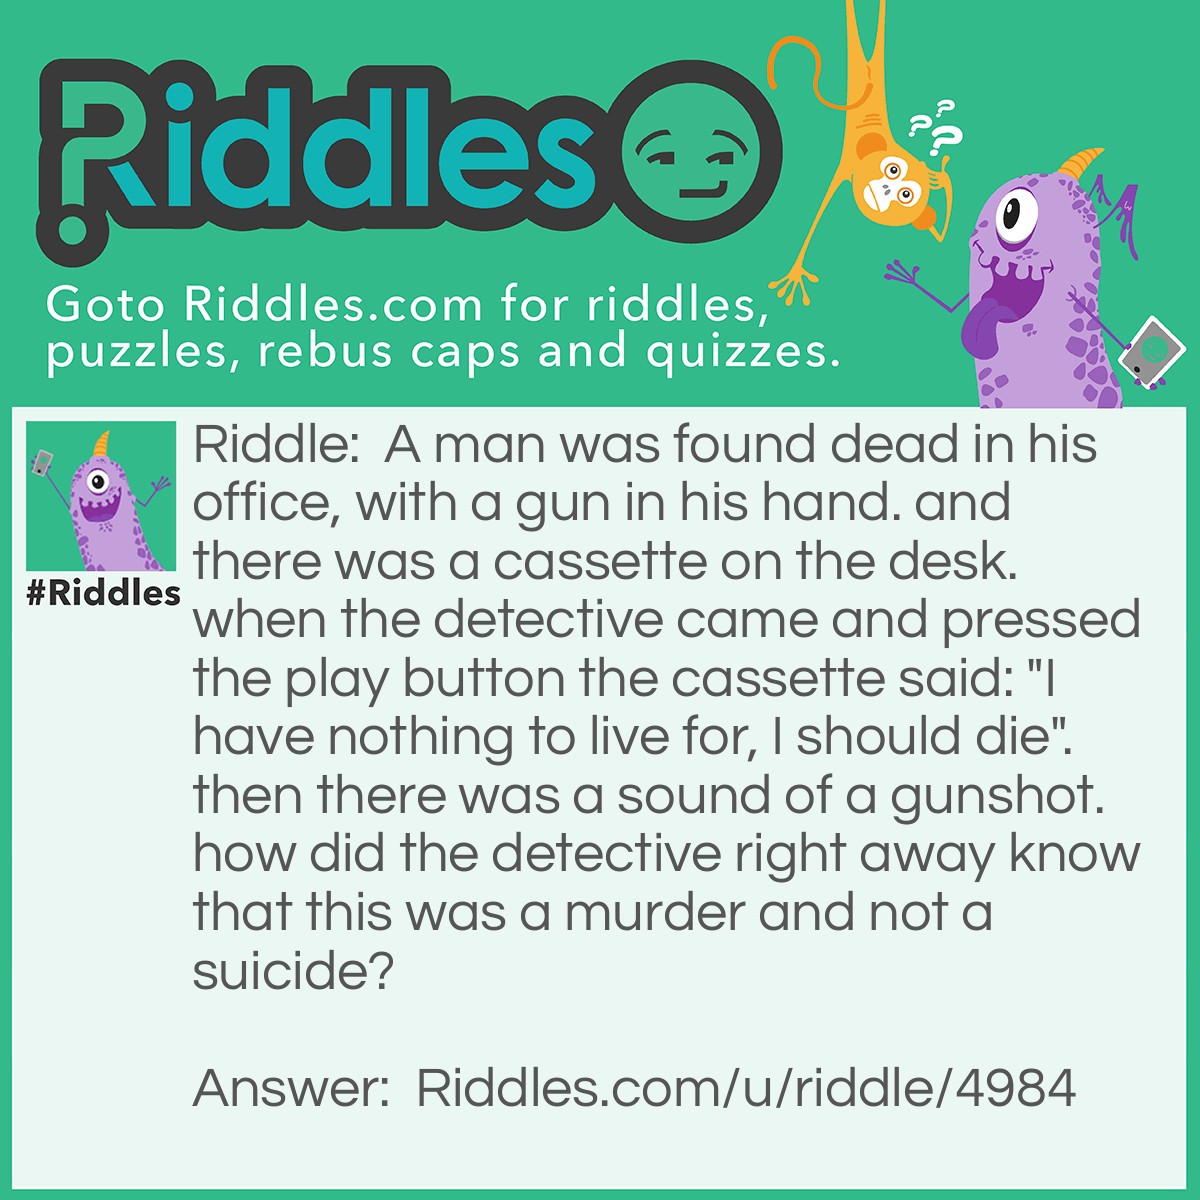 Riddle: A man was found dead in his office, with a gun in his hand. and there was a cassette on the desk. when the detective came and pressed the play button the cassette said: "I have nothing to live for, I should die". then there was a sound of a gunshot. how did the detective right away know that this was a murder and not a suicide? Answer: Someone had to rewind the tape in the cassette so that when the detective played it; it had to be rewound.